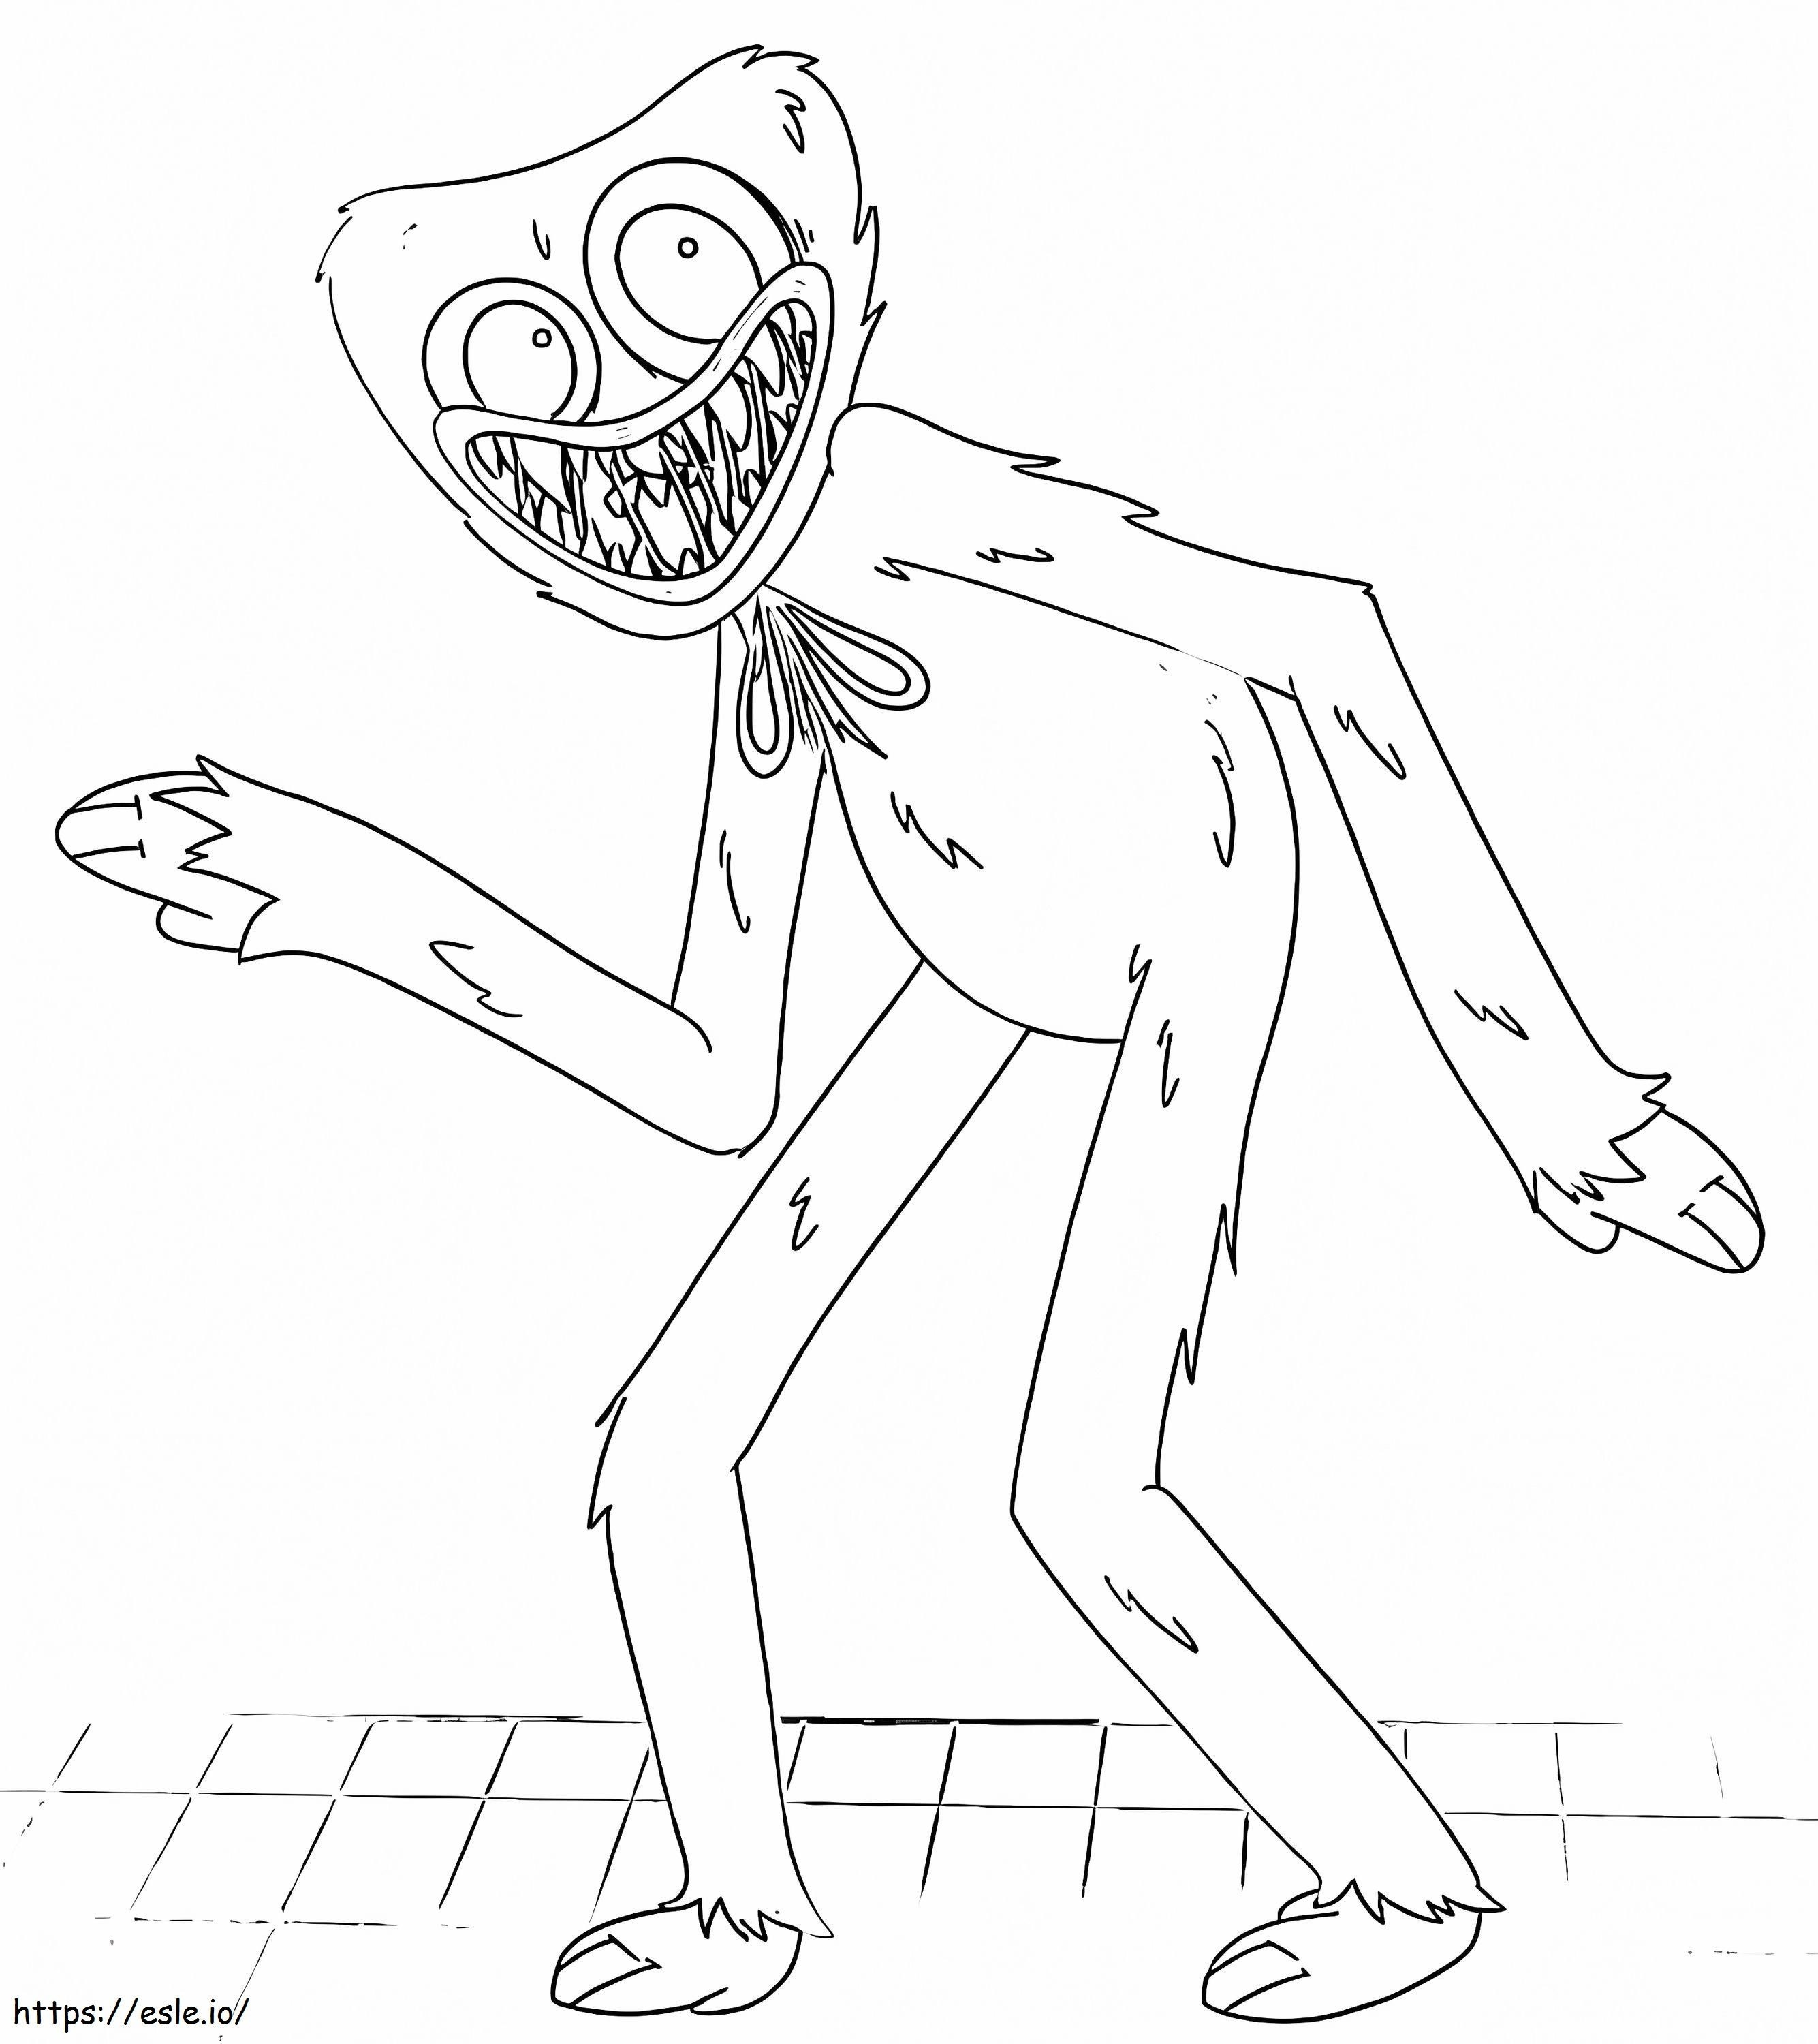 Huggy Wuggy 3 coloring page